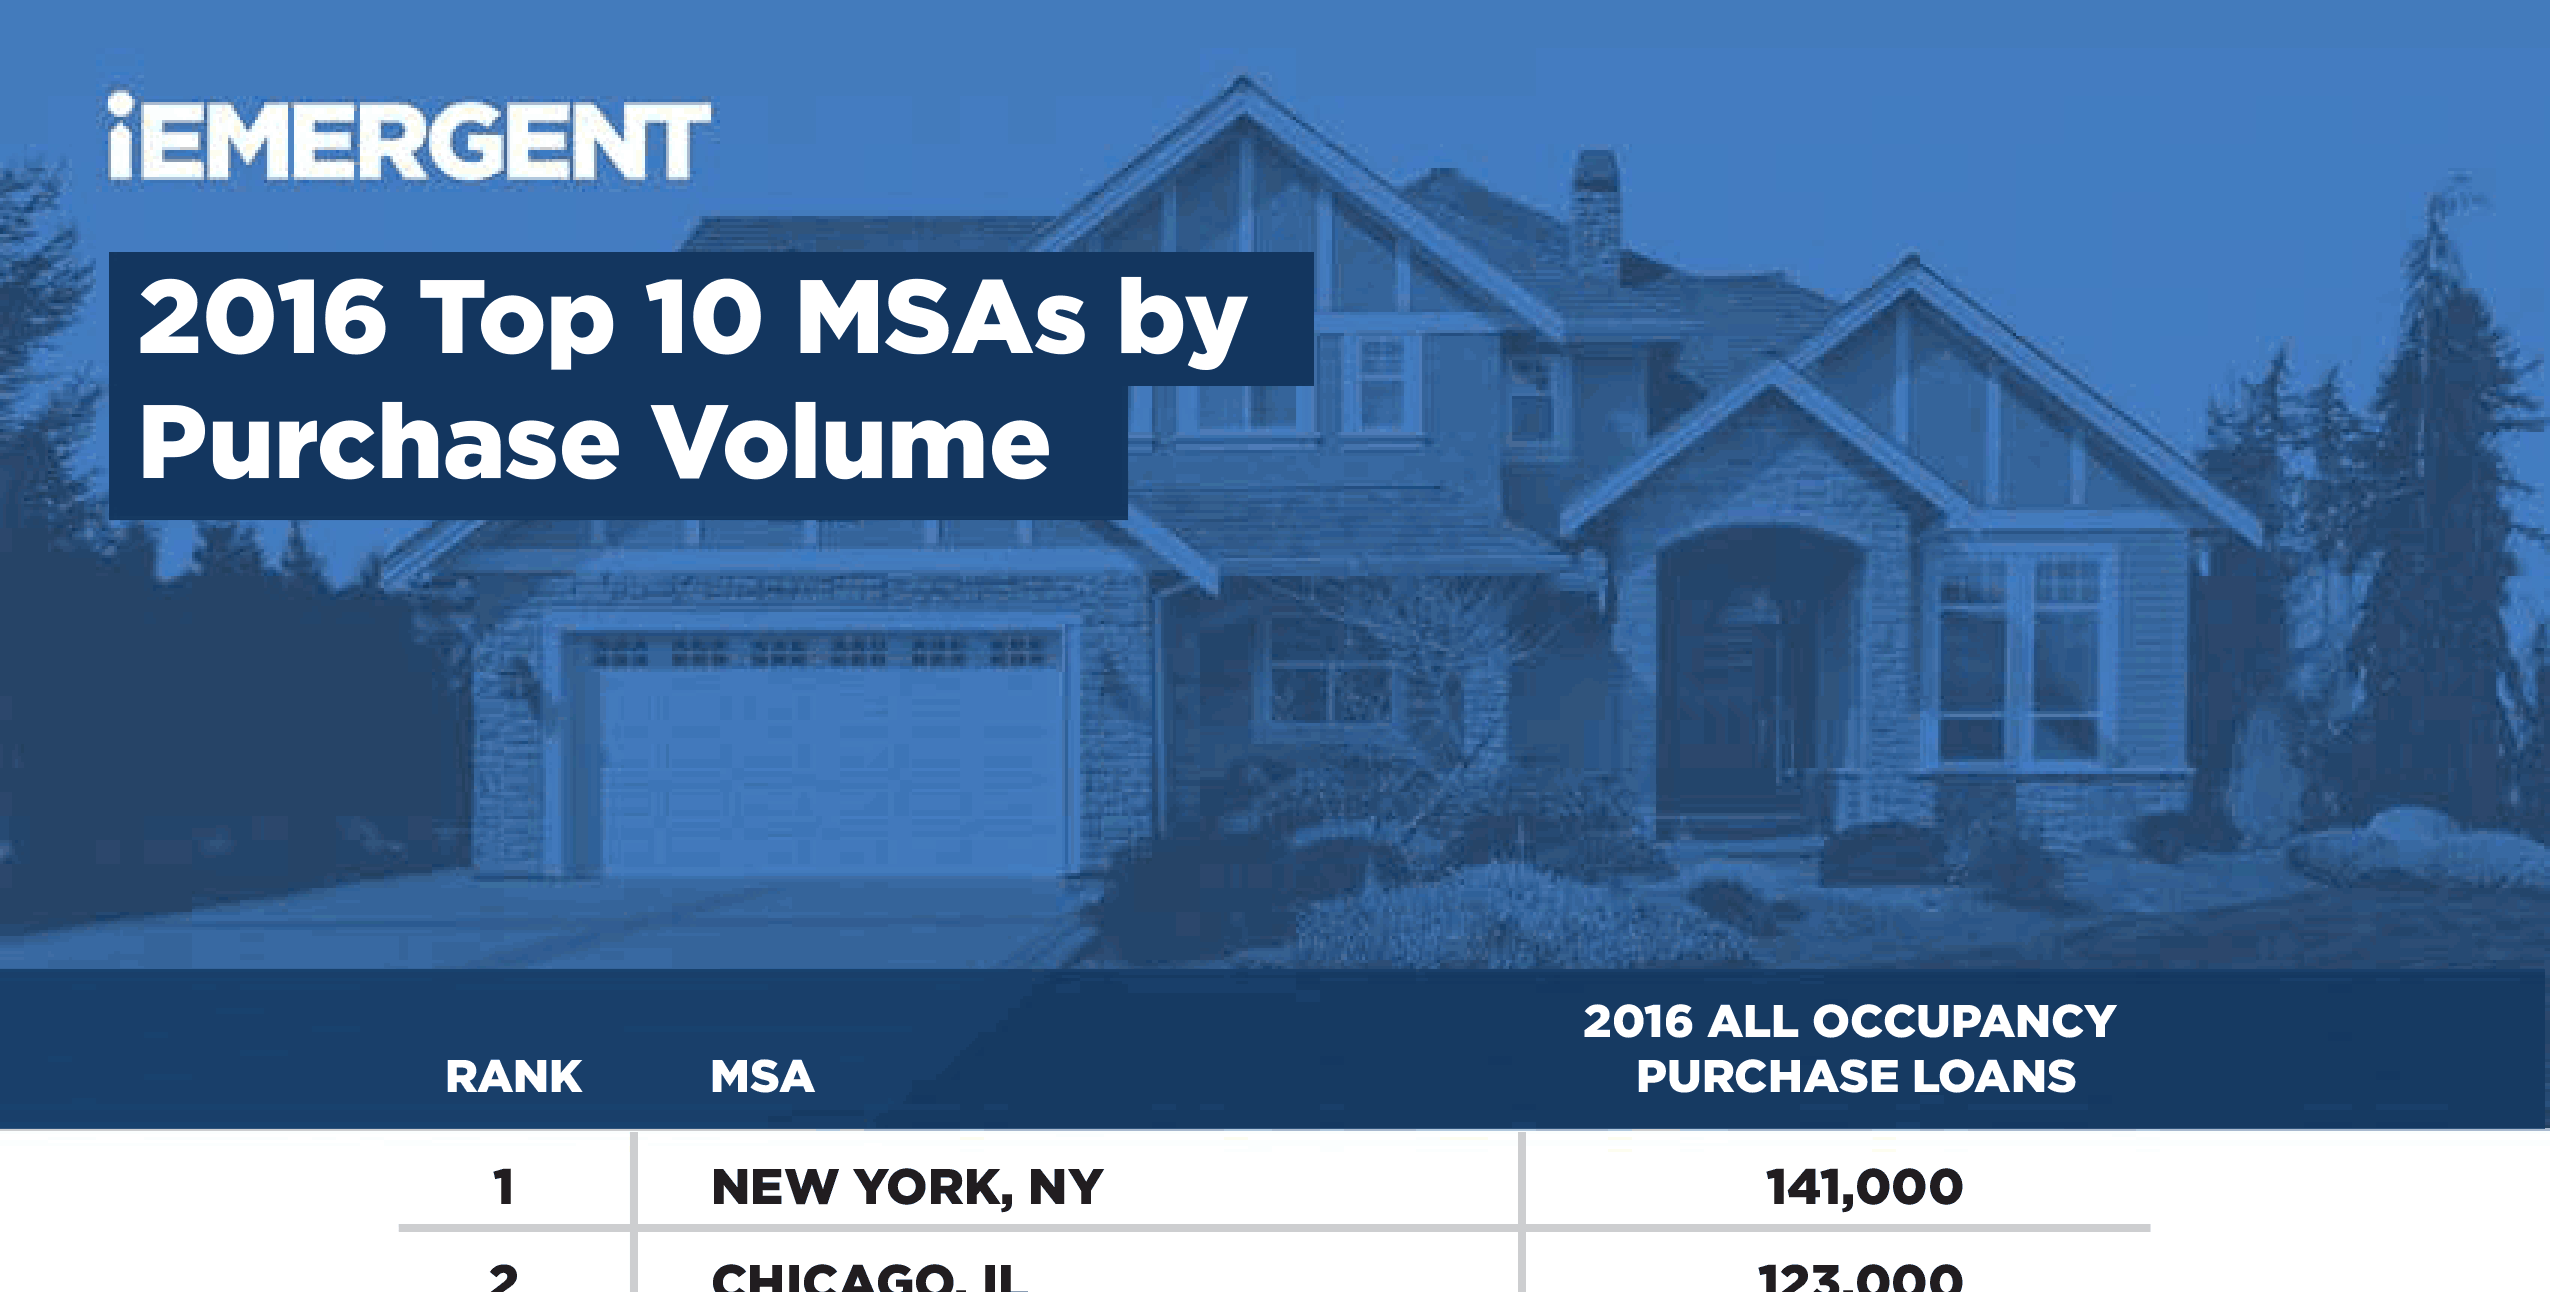 2016 Top 10 MSAs by Purchase Volume